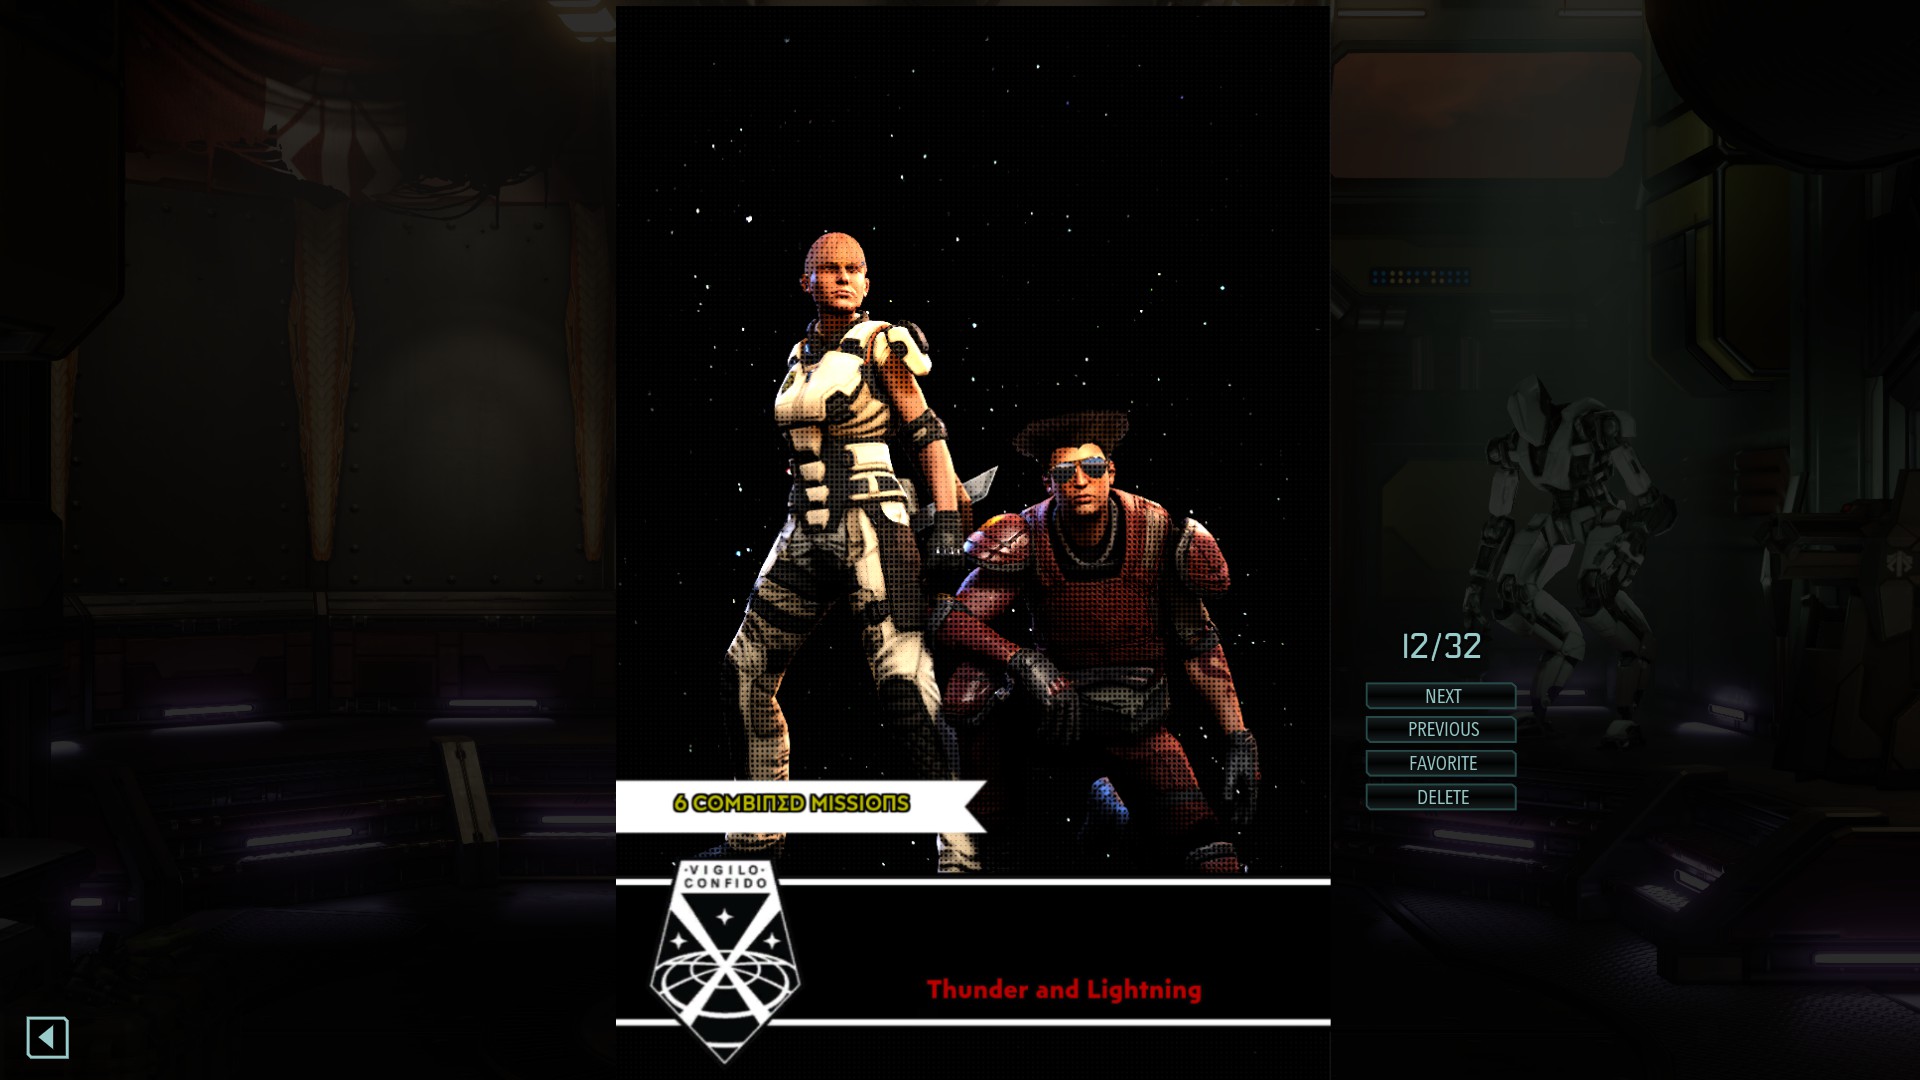 XCOM director says no plans for the series while he's still